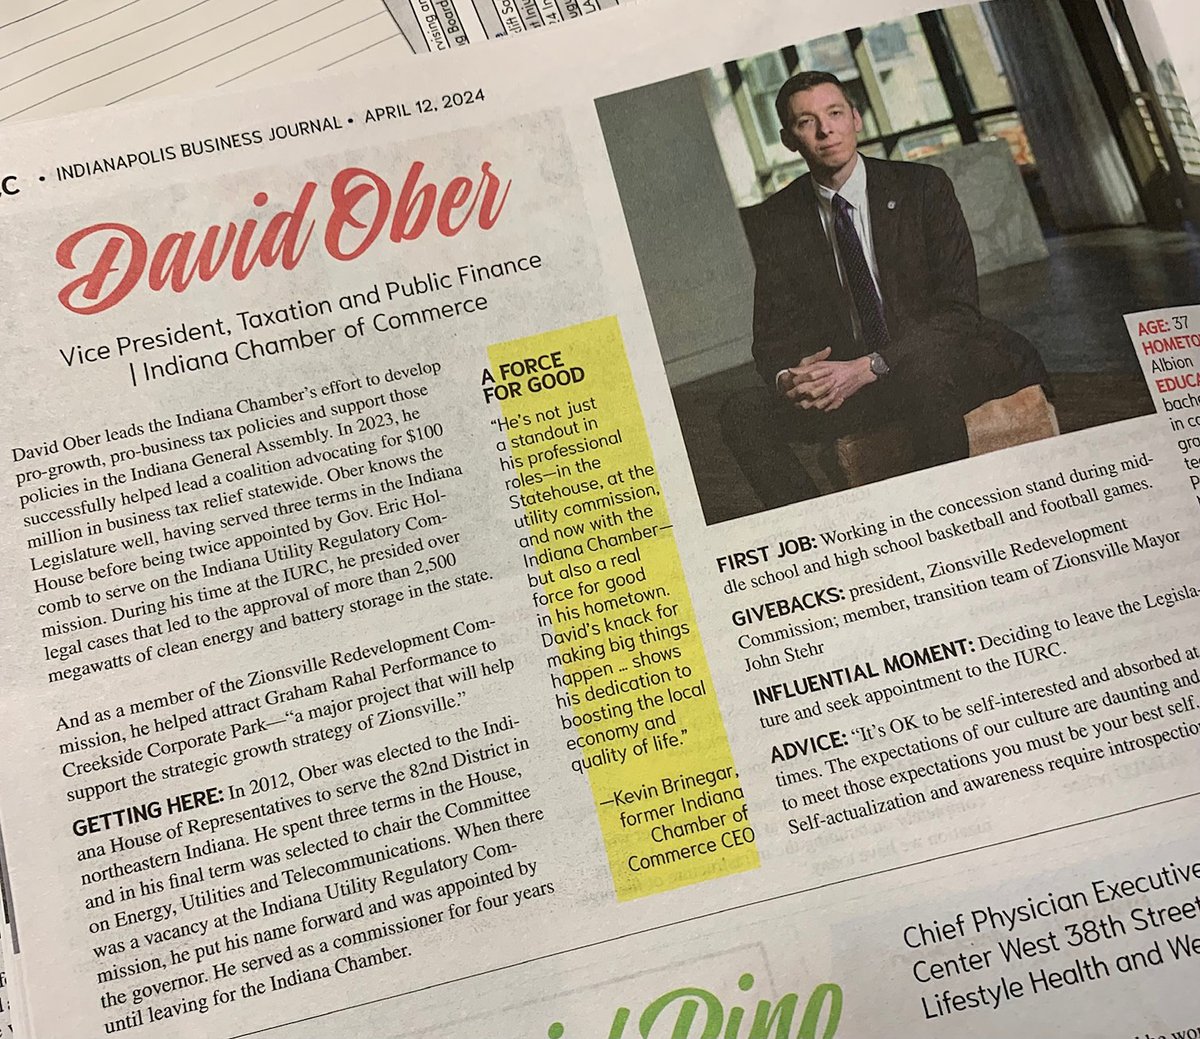 It was a pleasure this morning to celebrate David Ober, our vice president of taxation and public finance, as he was named to the Indianapolis Business Journal's Forty Under 40 list. We congratulate him and it's a pleasure to call Dave a colleague! #IBJ40 #40under40